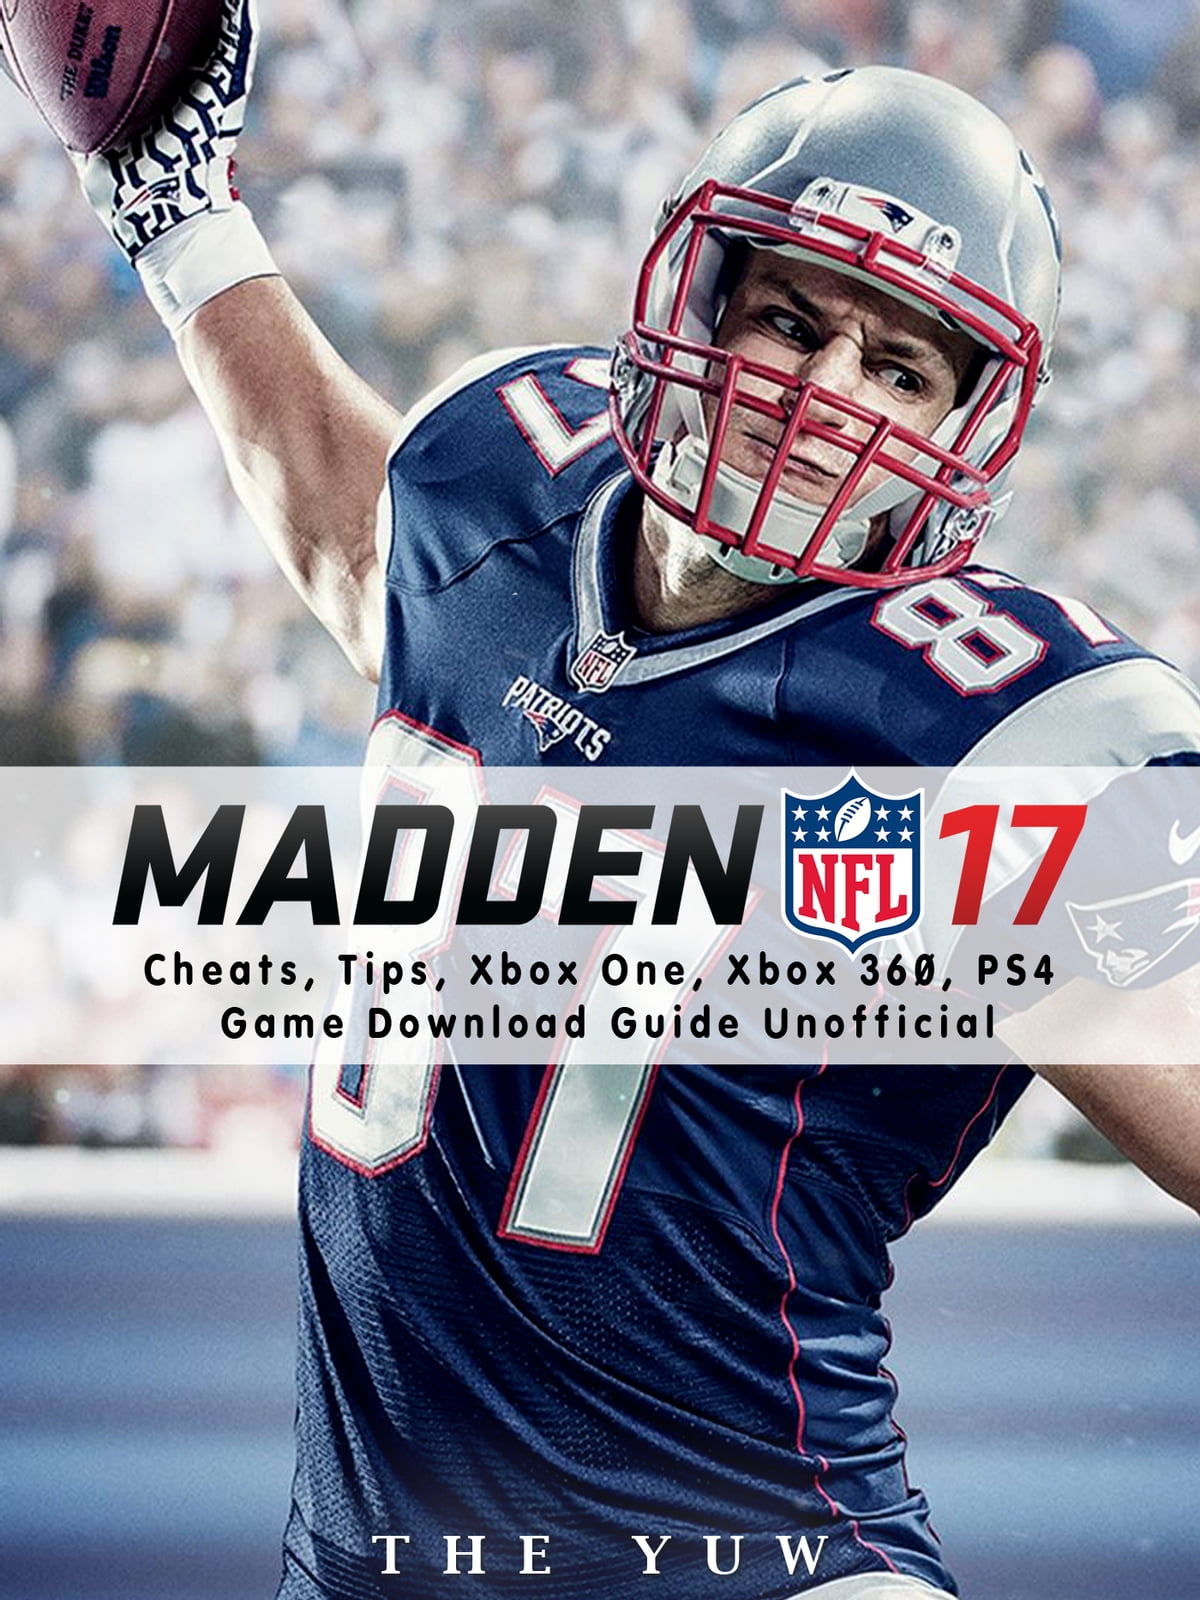 Madden nfl cheats tips xbox one xbox ps game download guide unofficial ebook by the yuw